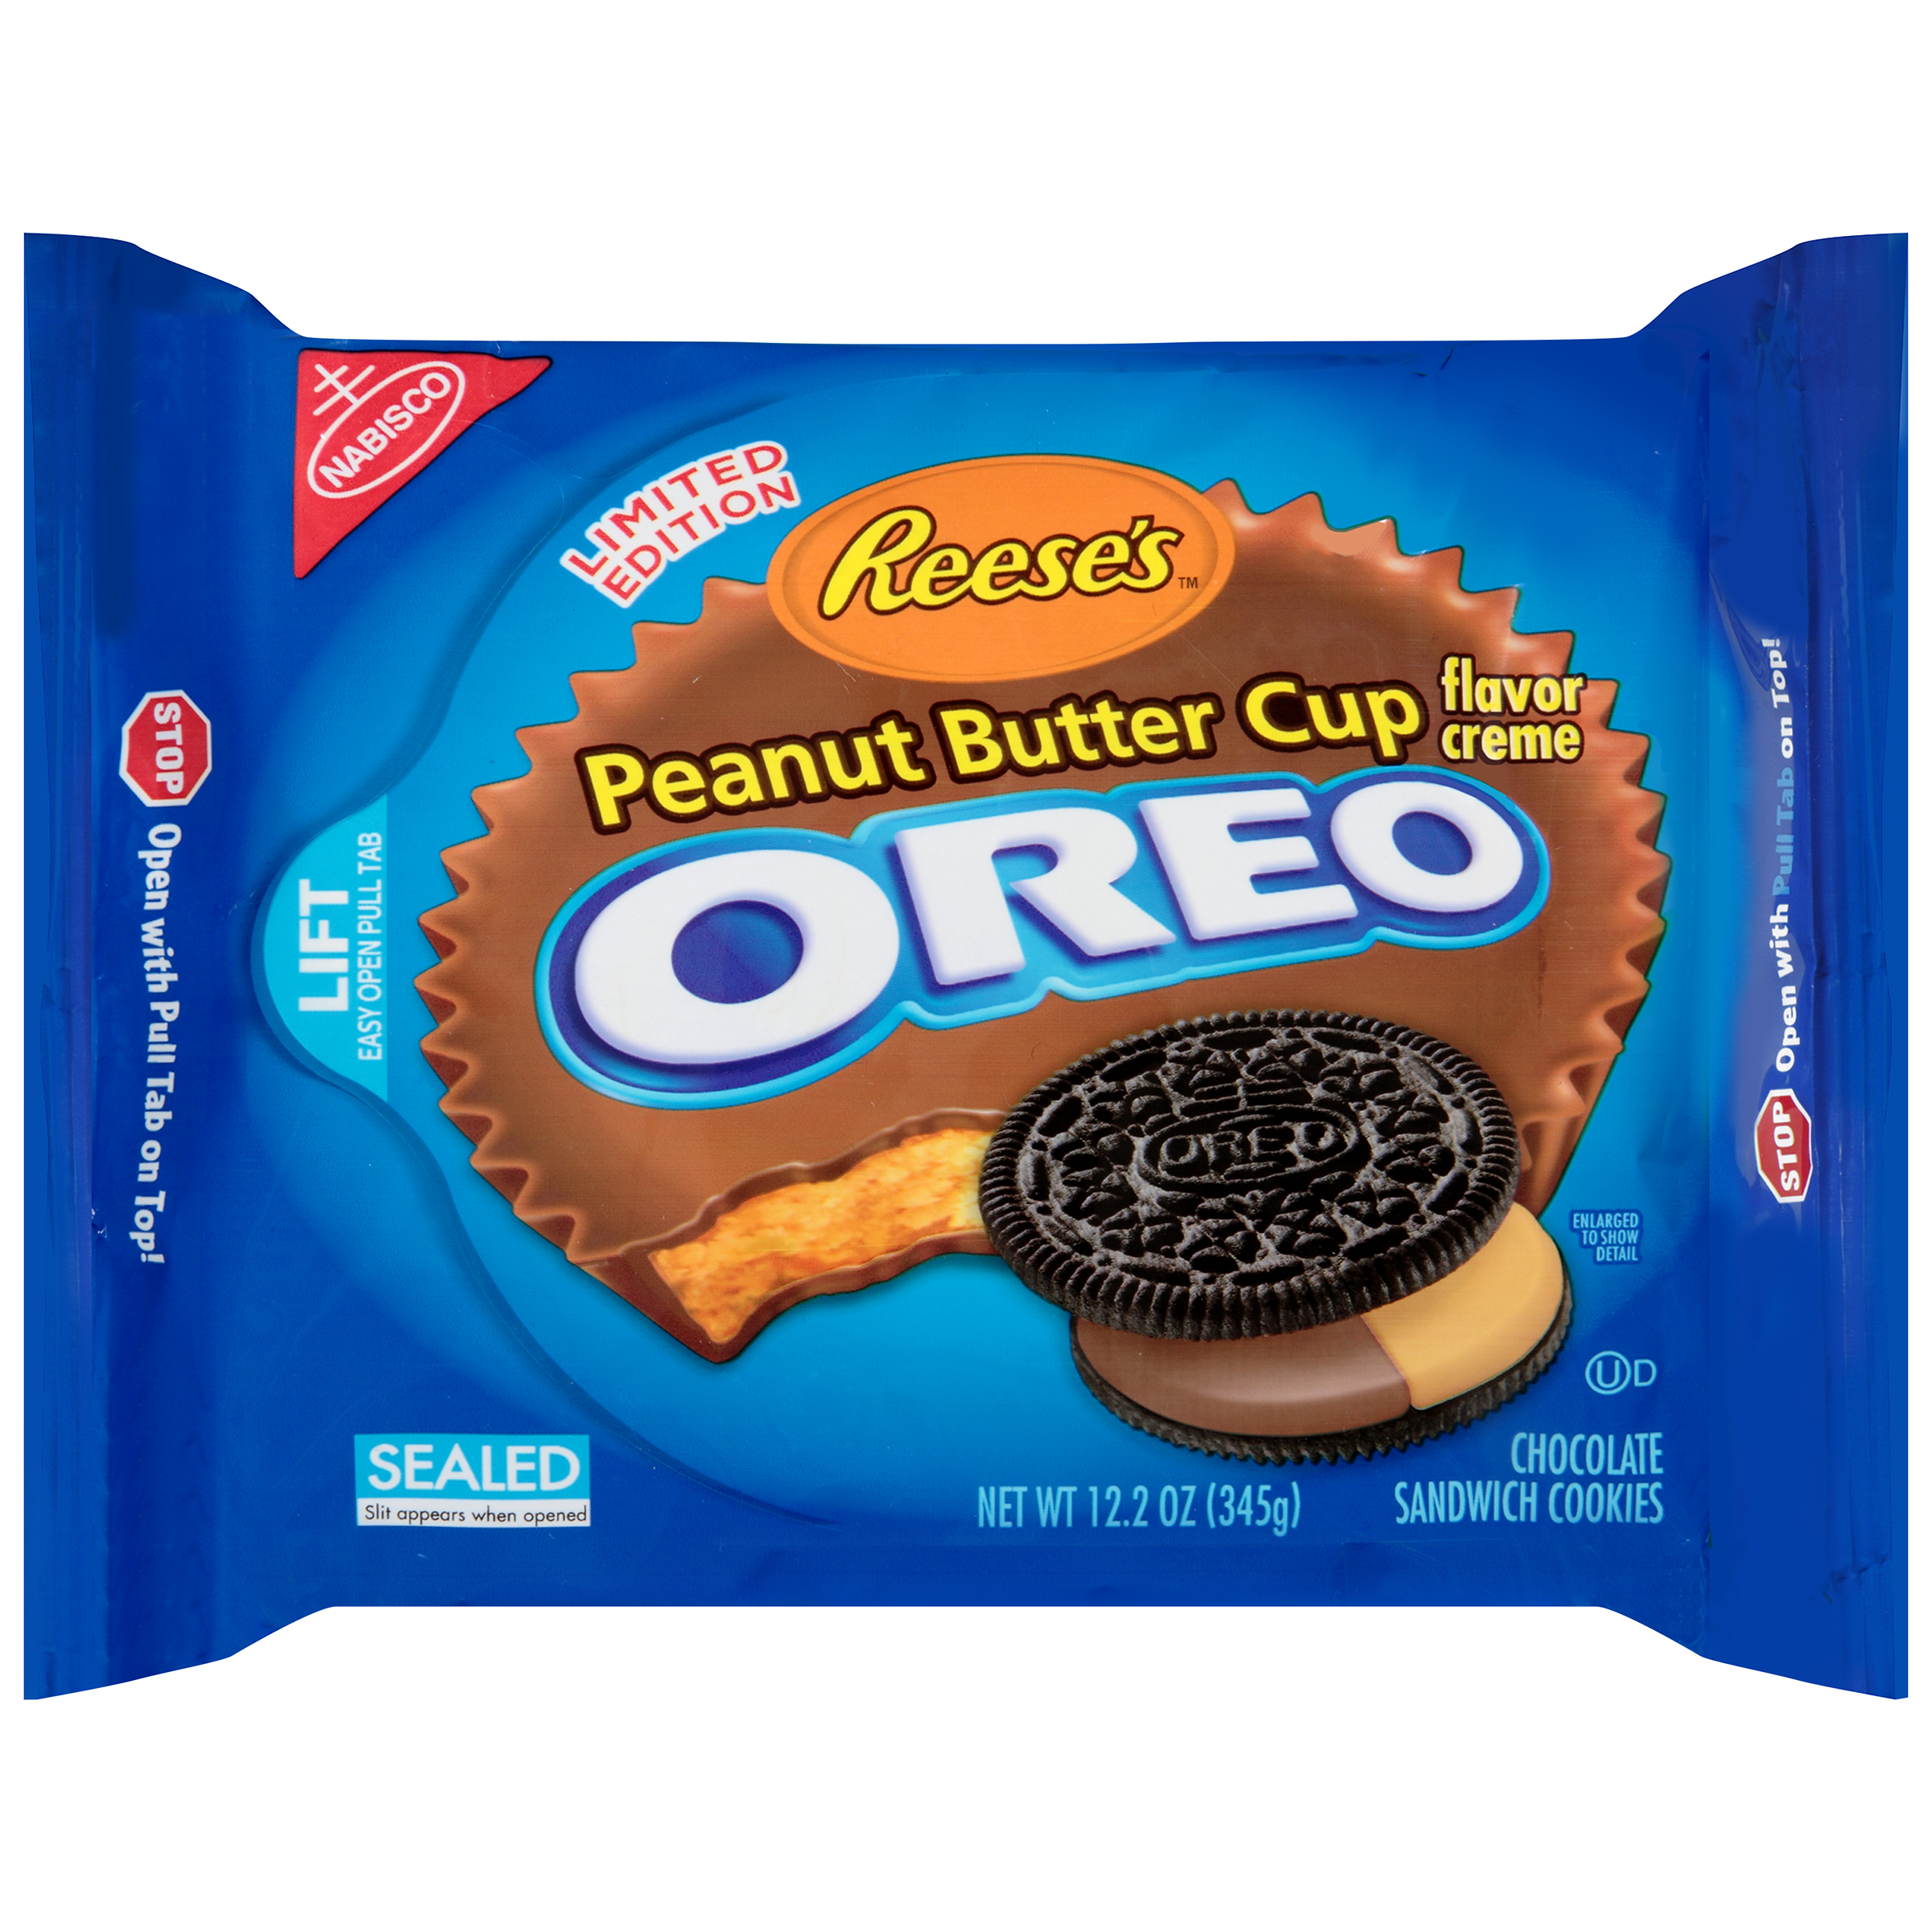 Nabisco Reese's Oreo Peanut Butter Cup Creme Chocolate Sandwich Cookies, 12.2 Oz. - image 1 of 6